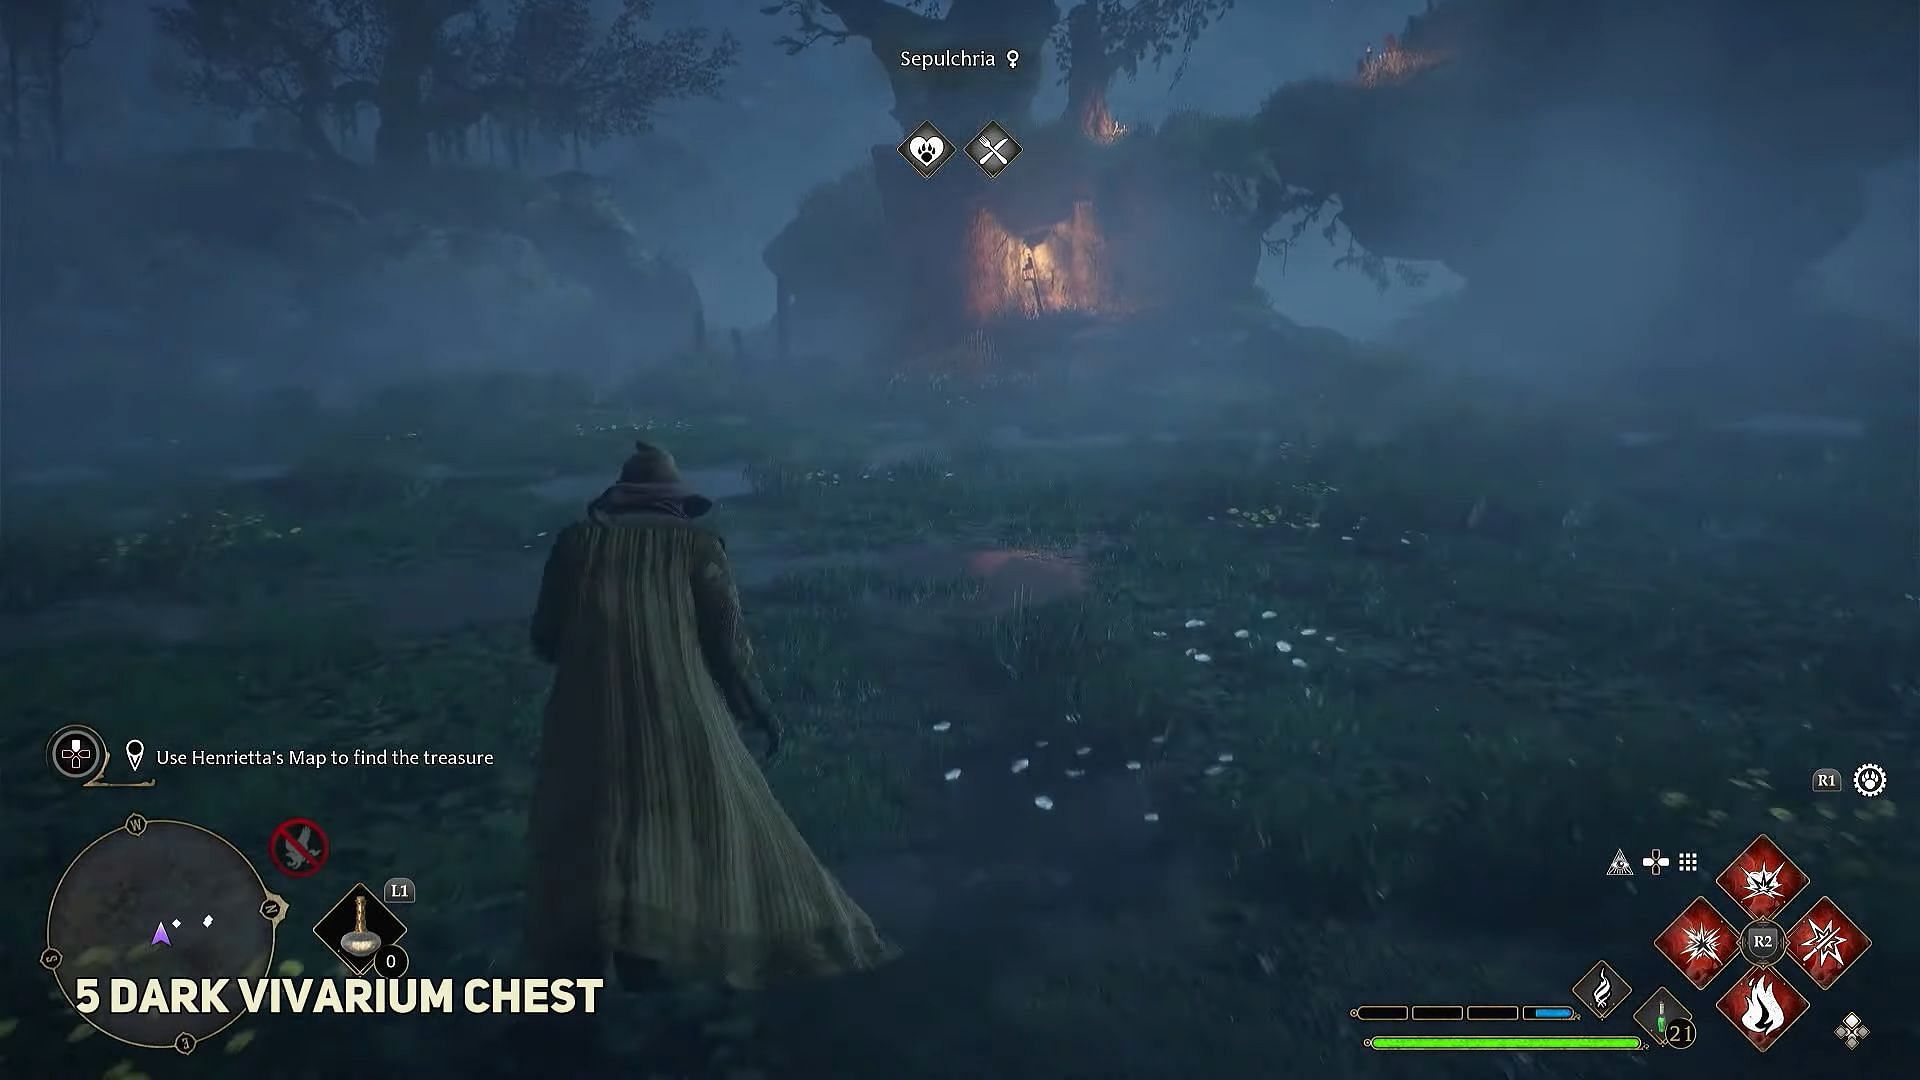 Location of the second chest in the Dark biome (Image via YouTube/@WoWQuest)